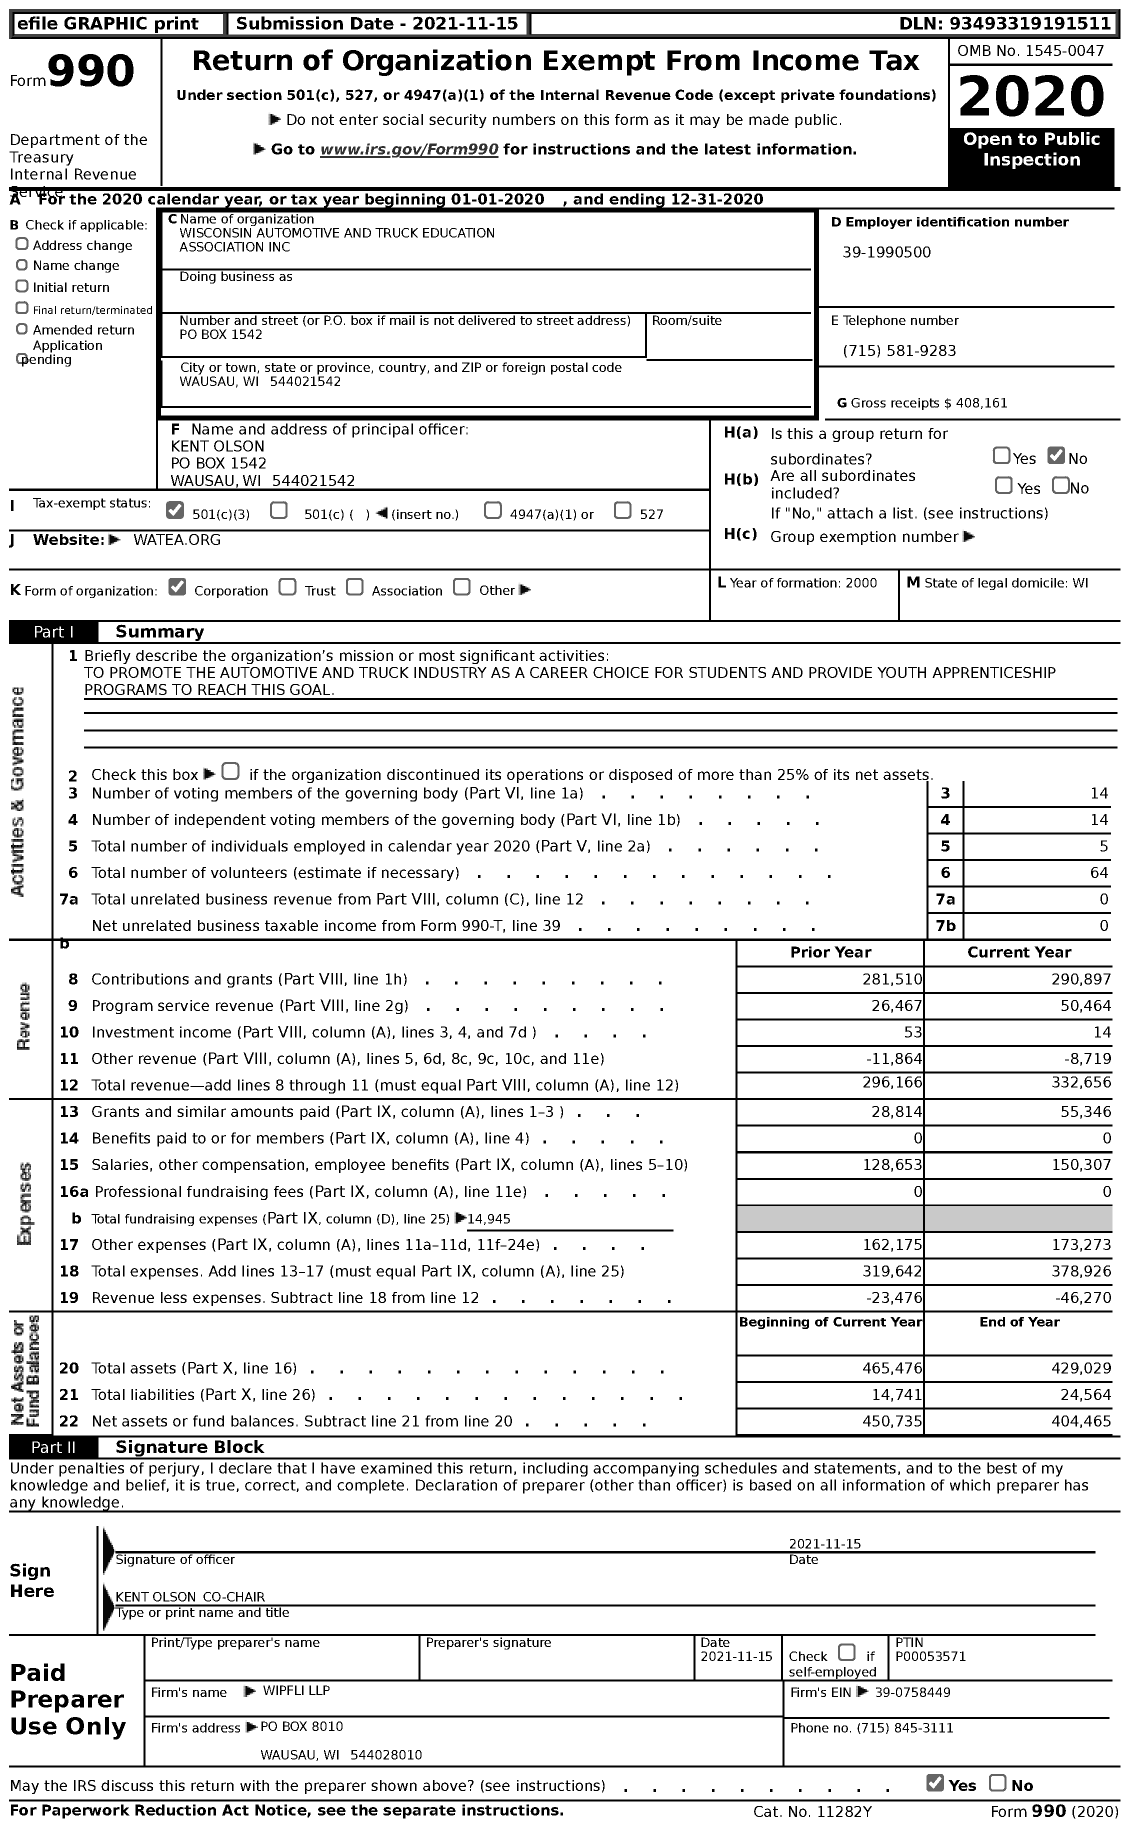 Image of first page of 2020 Form 990 for Wisconsin Automotive and Truck Education Association